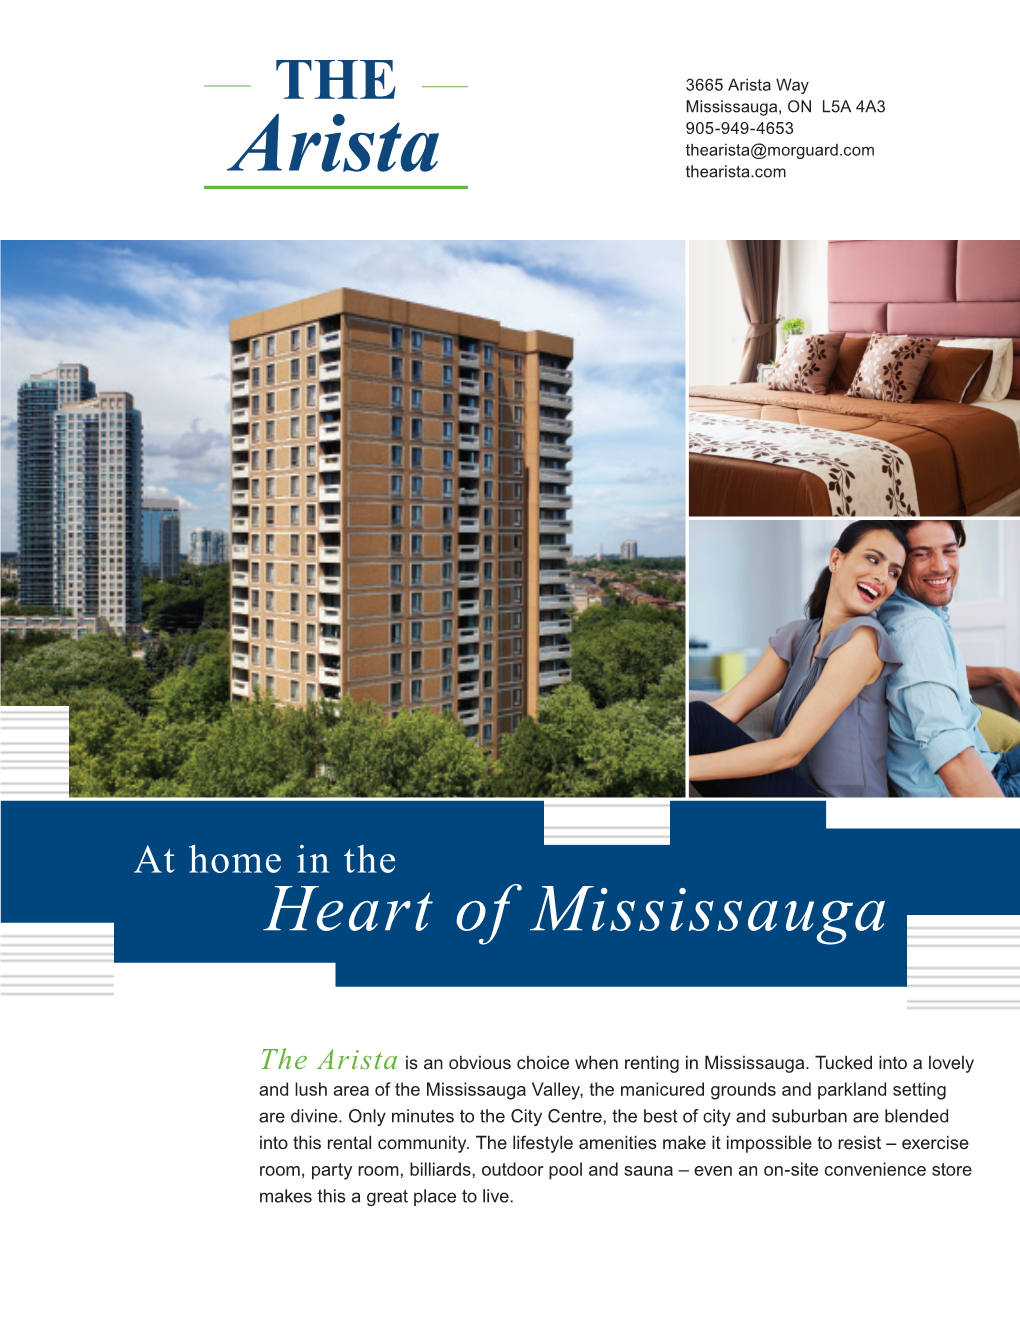 Heart of Mississauga